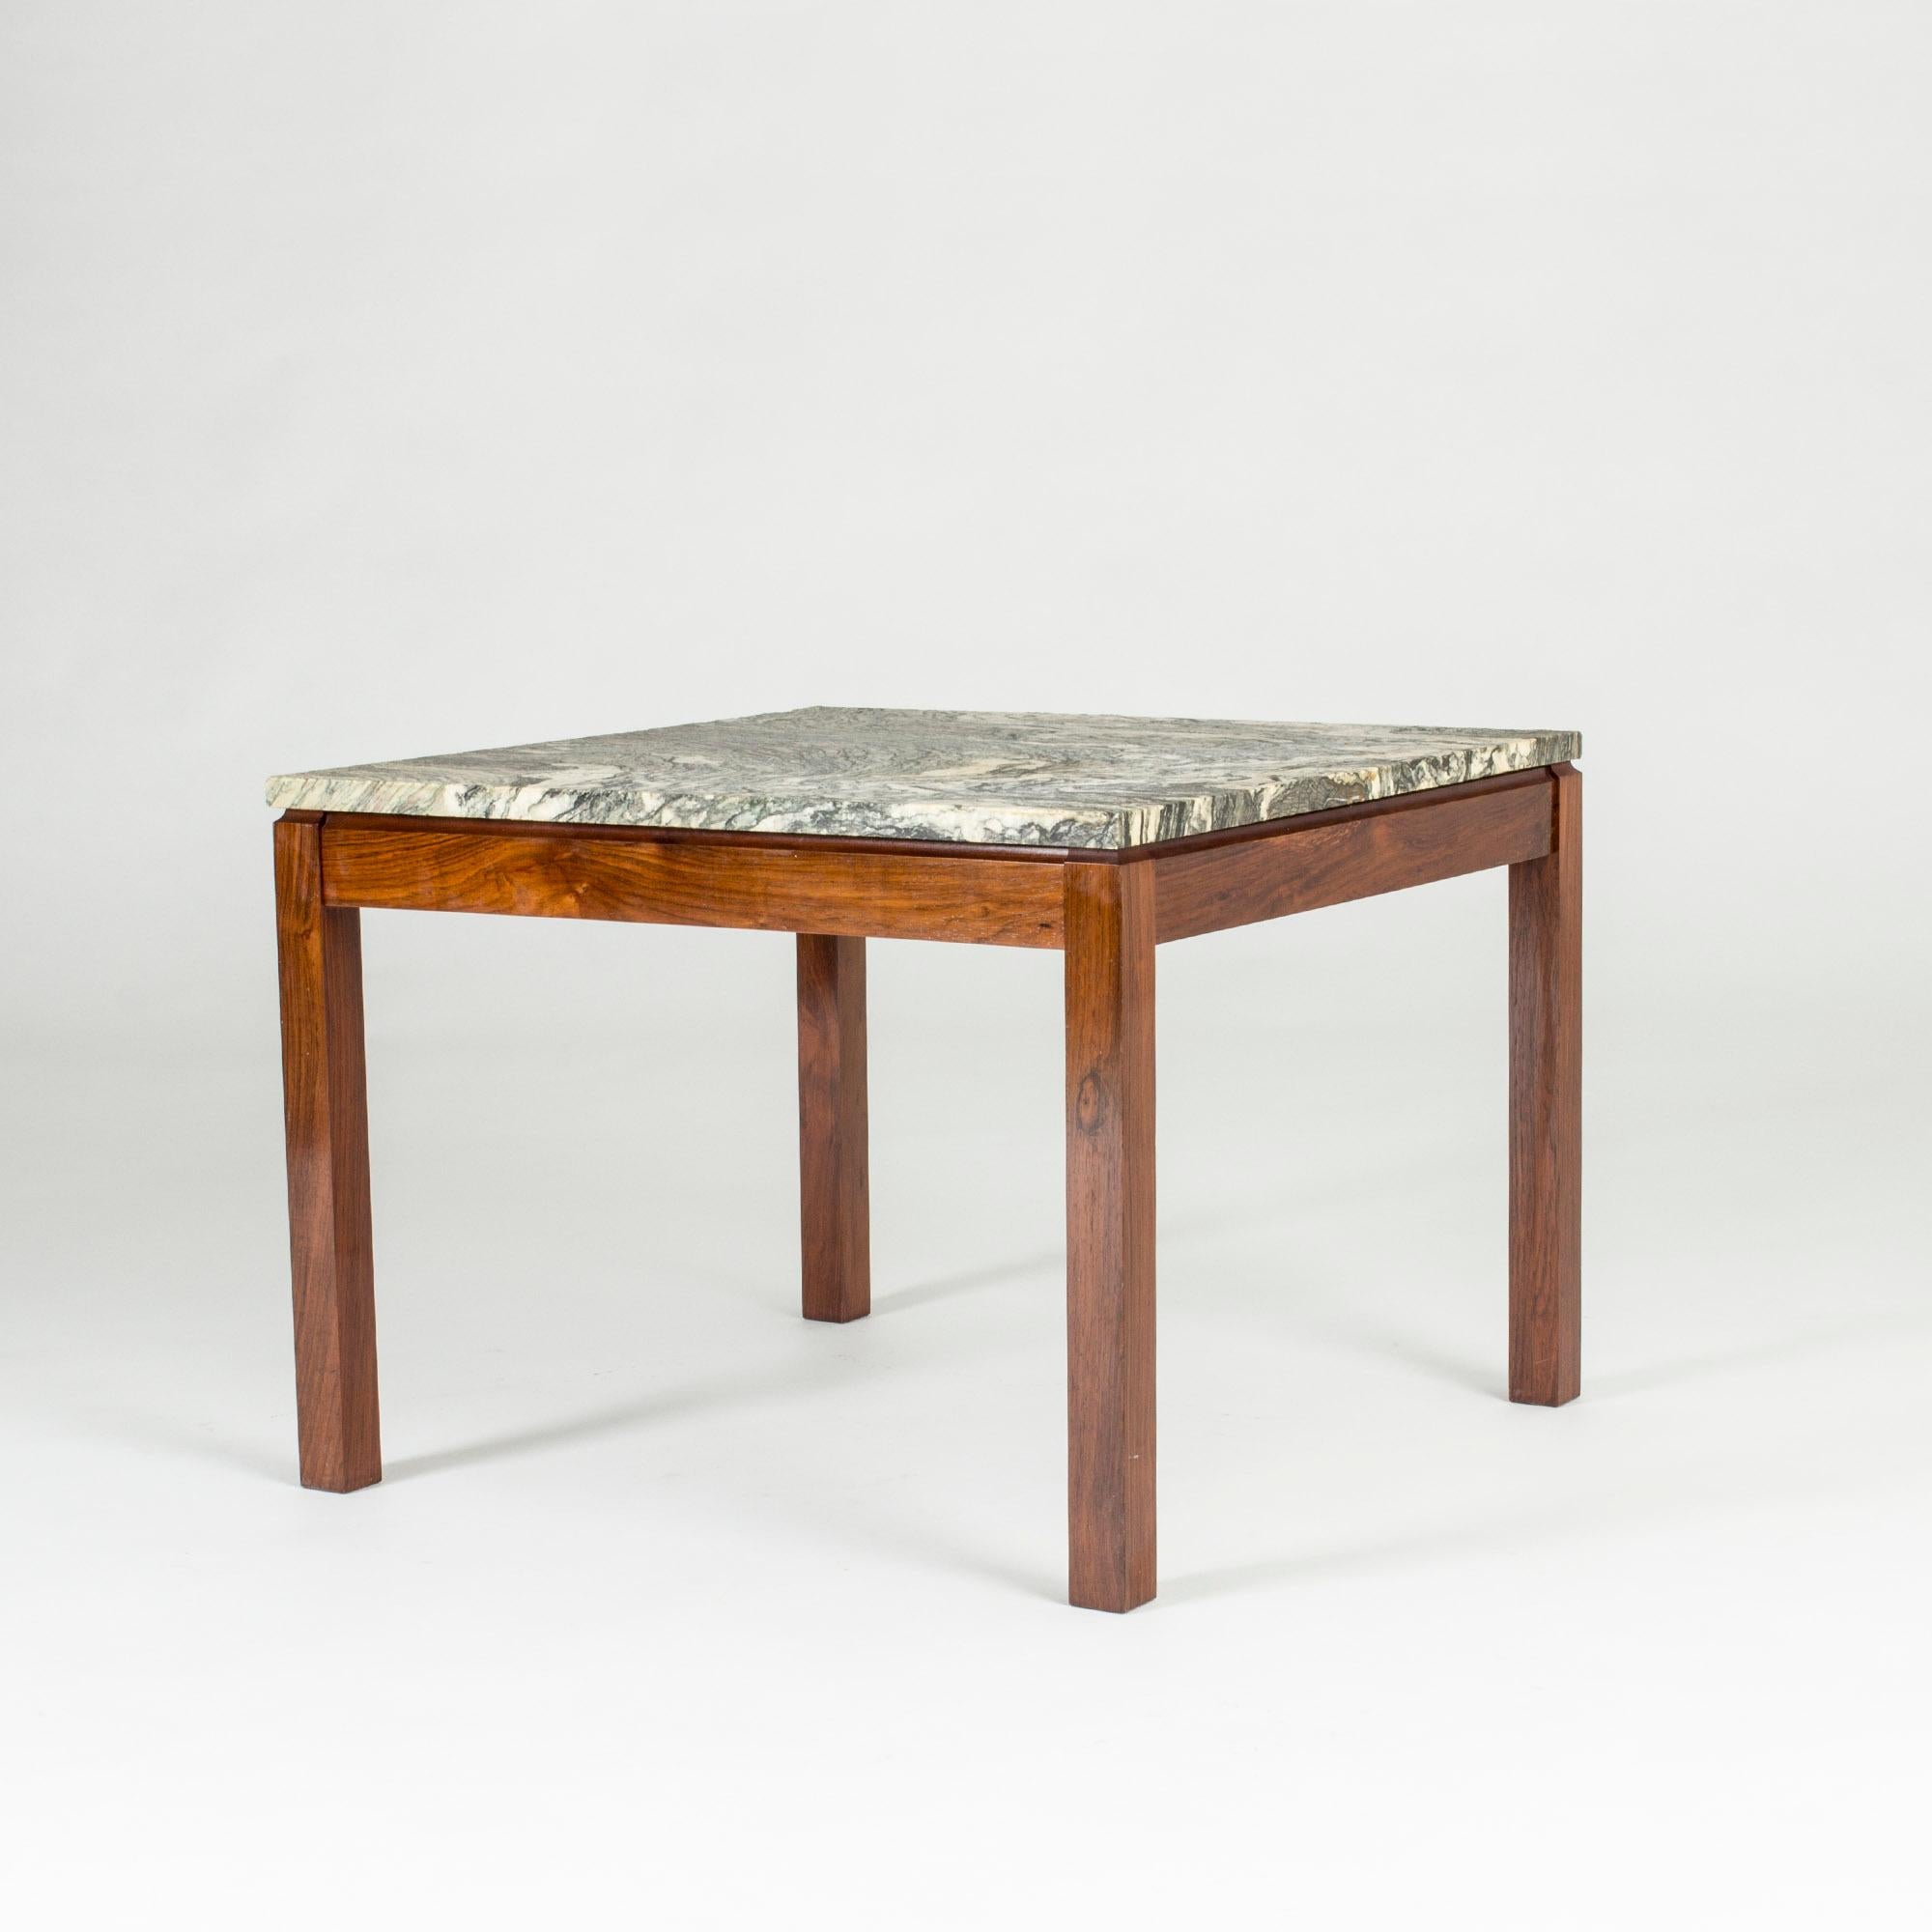 Neat Danish 1960s marble coffee table. Rosewood base and square marble table-top with a striking pattern.